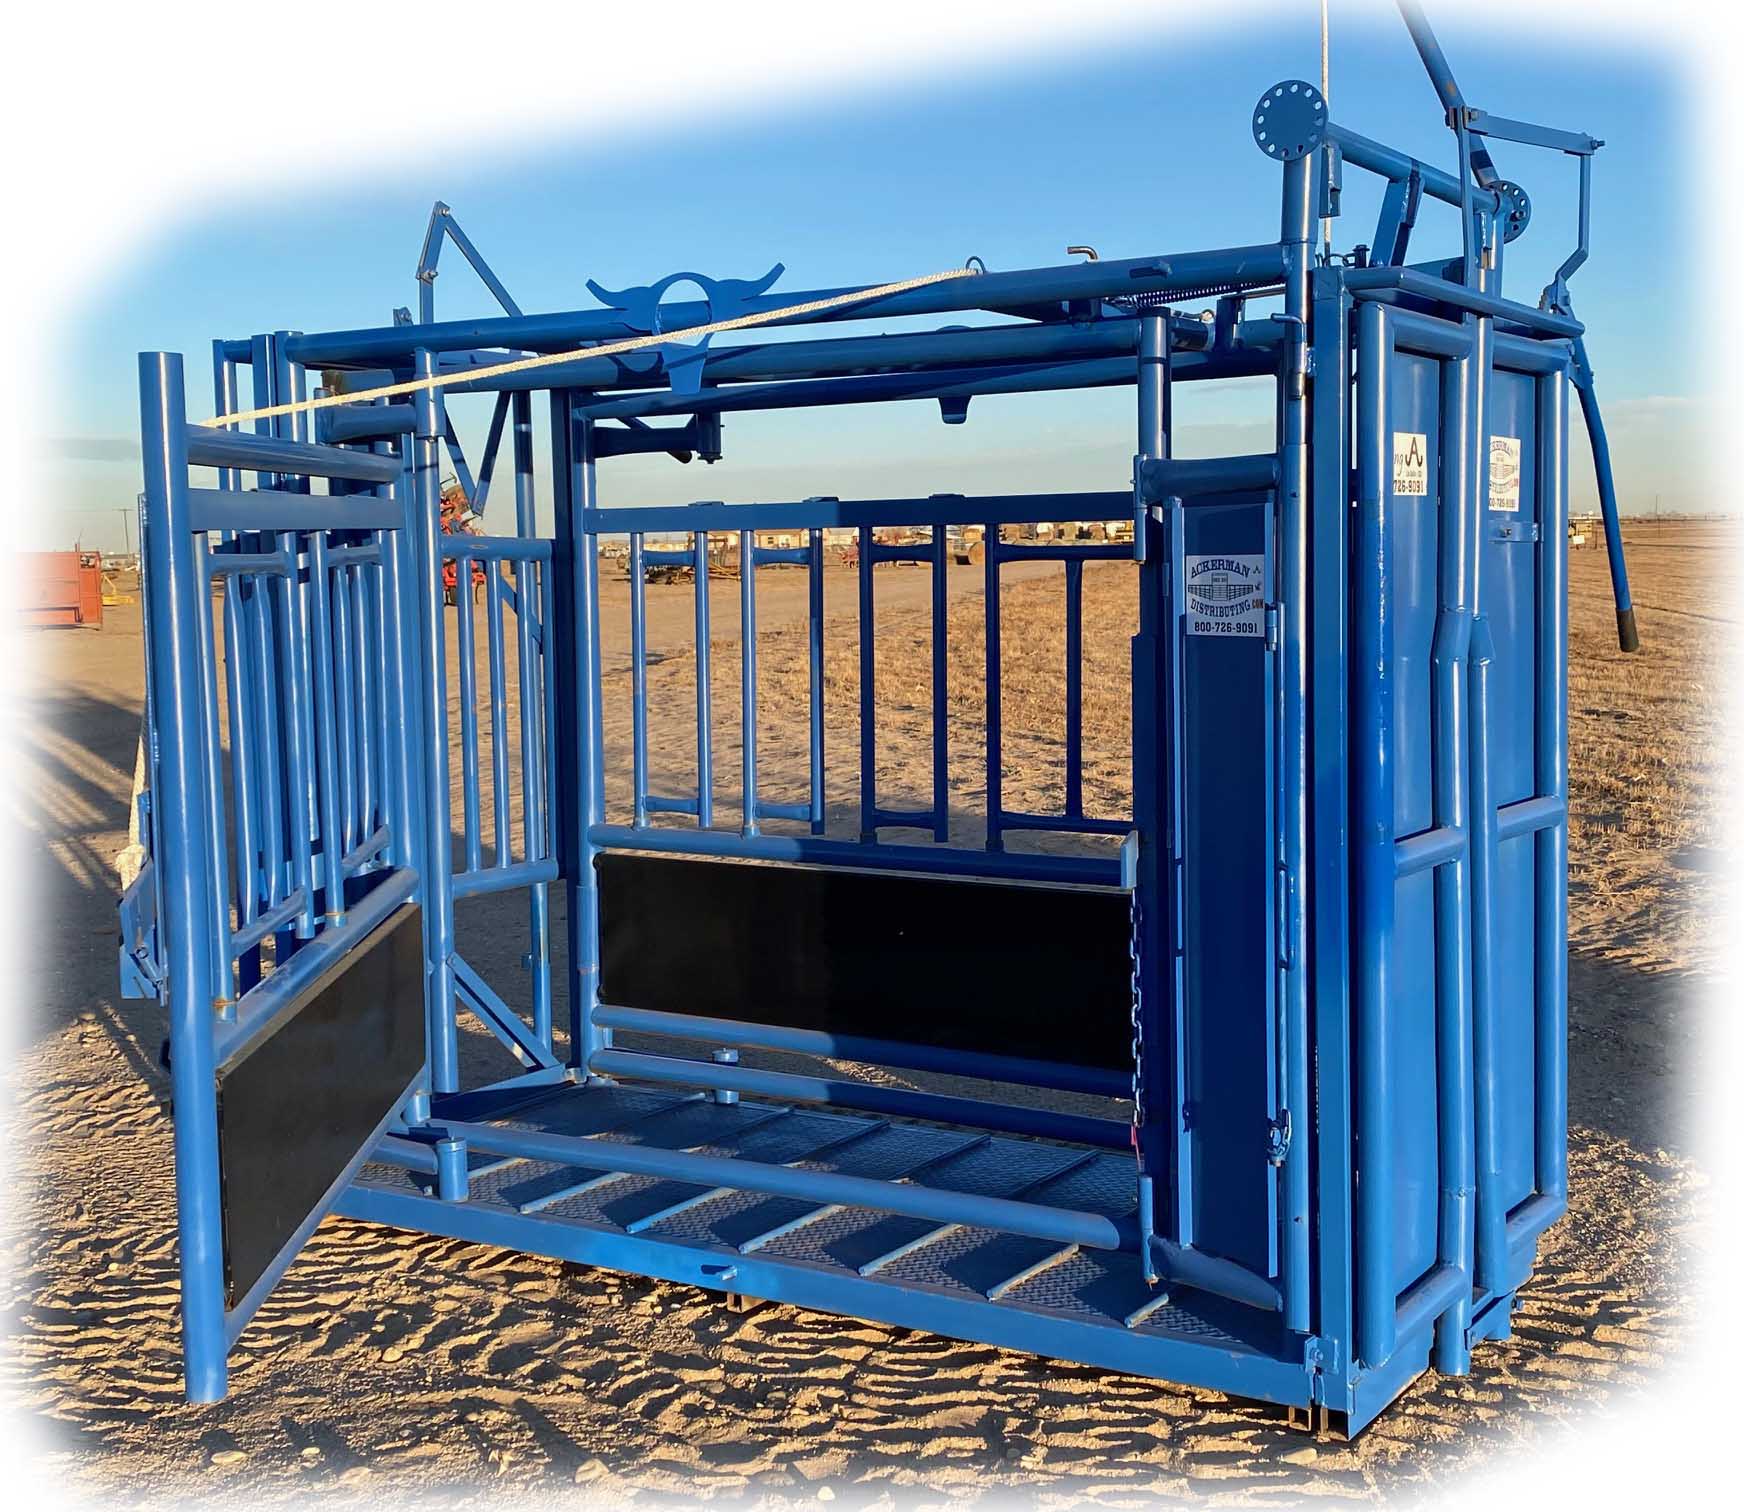 The Flying A Side Exit Cattle Squeeze Chute w/ Manual Headgate & Split Rear Tailgate